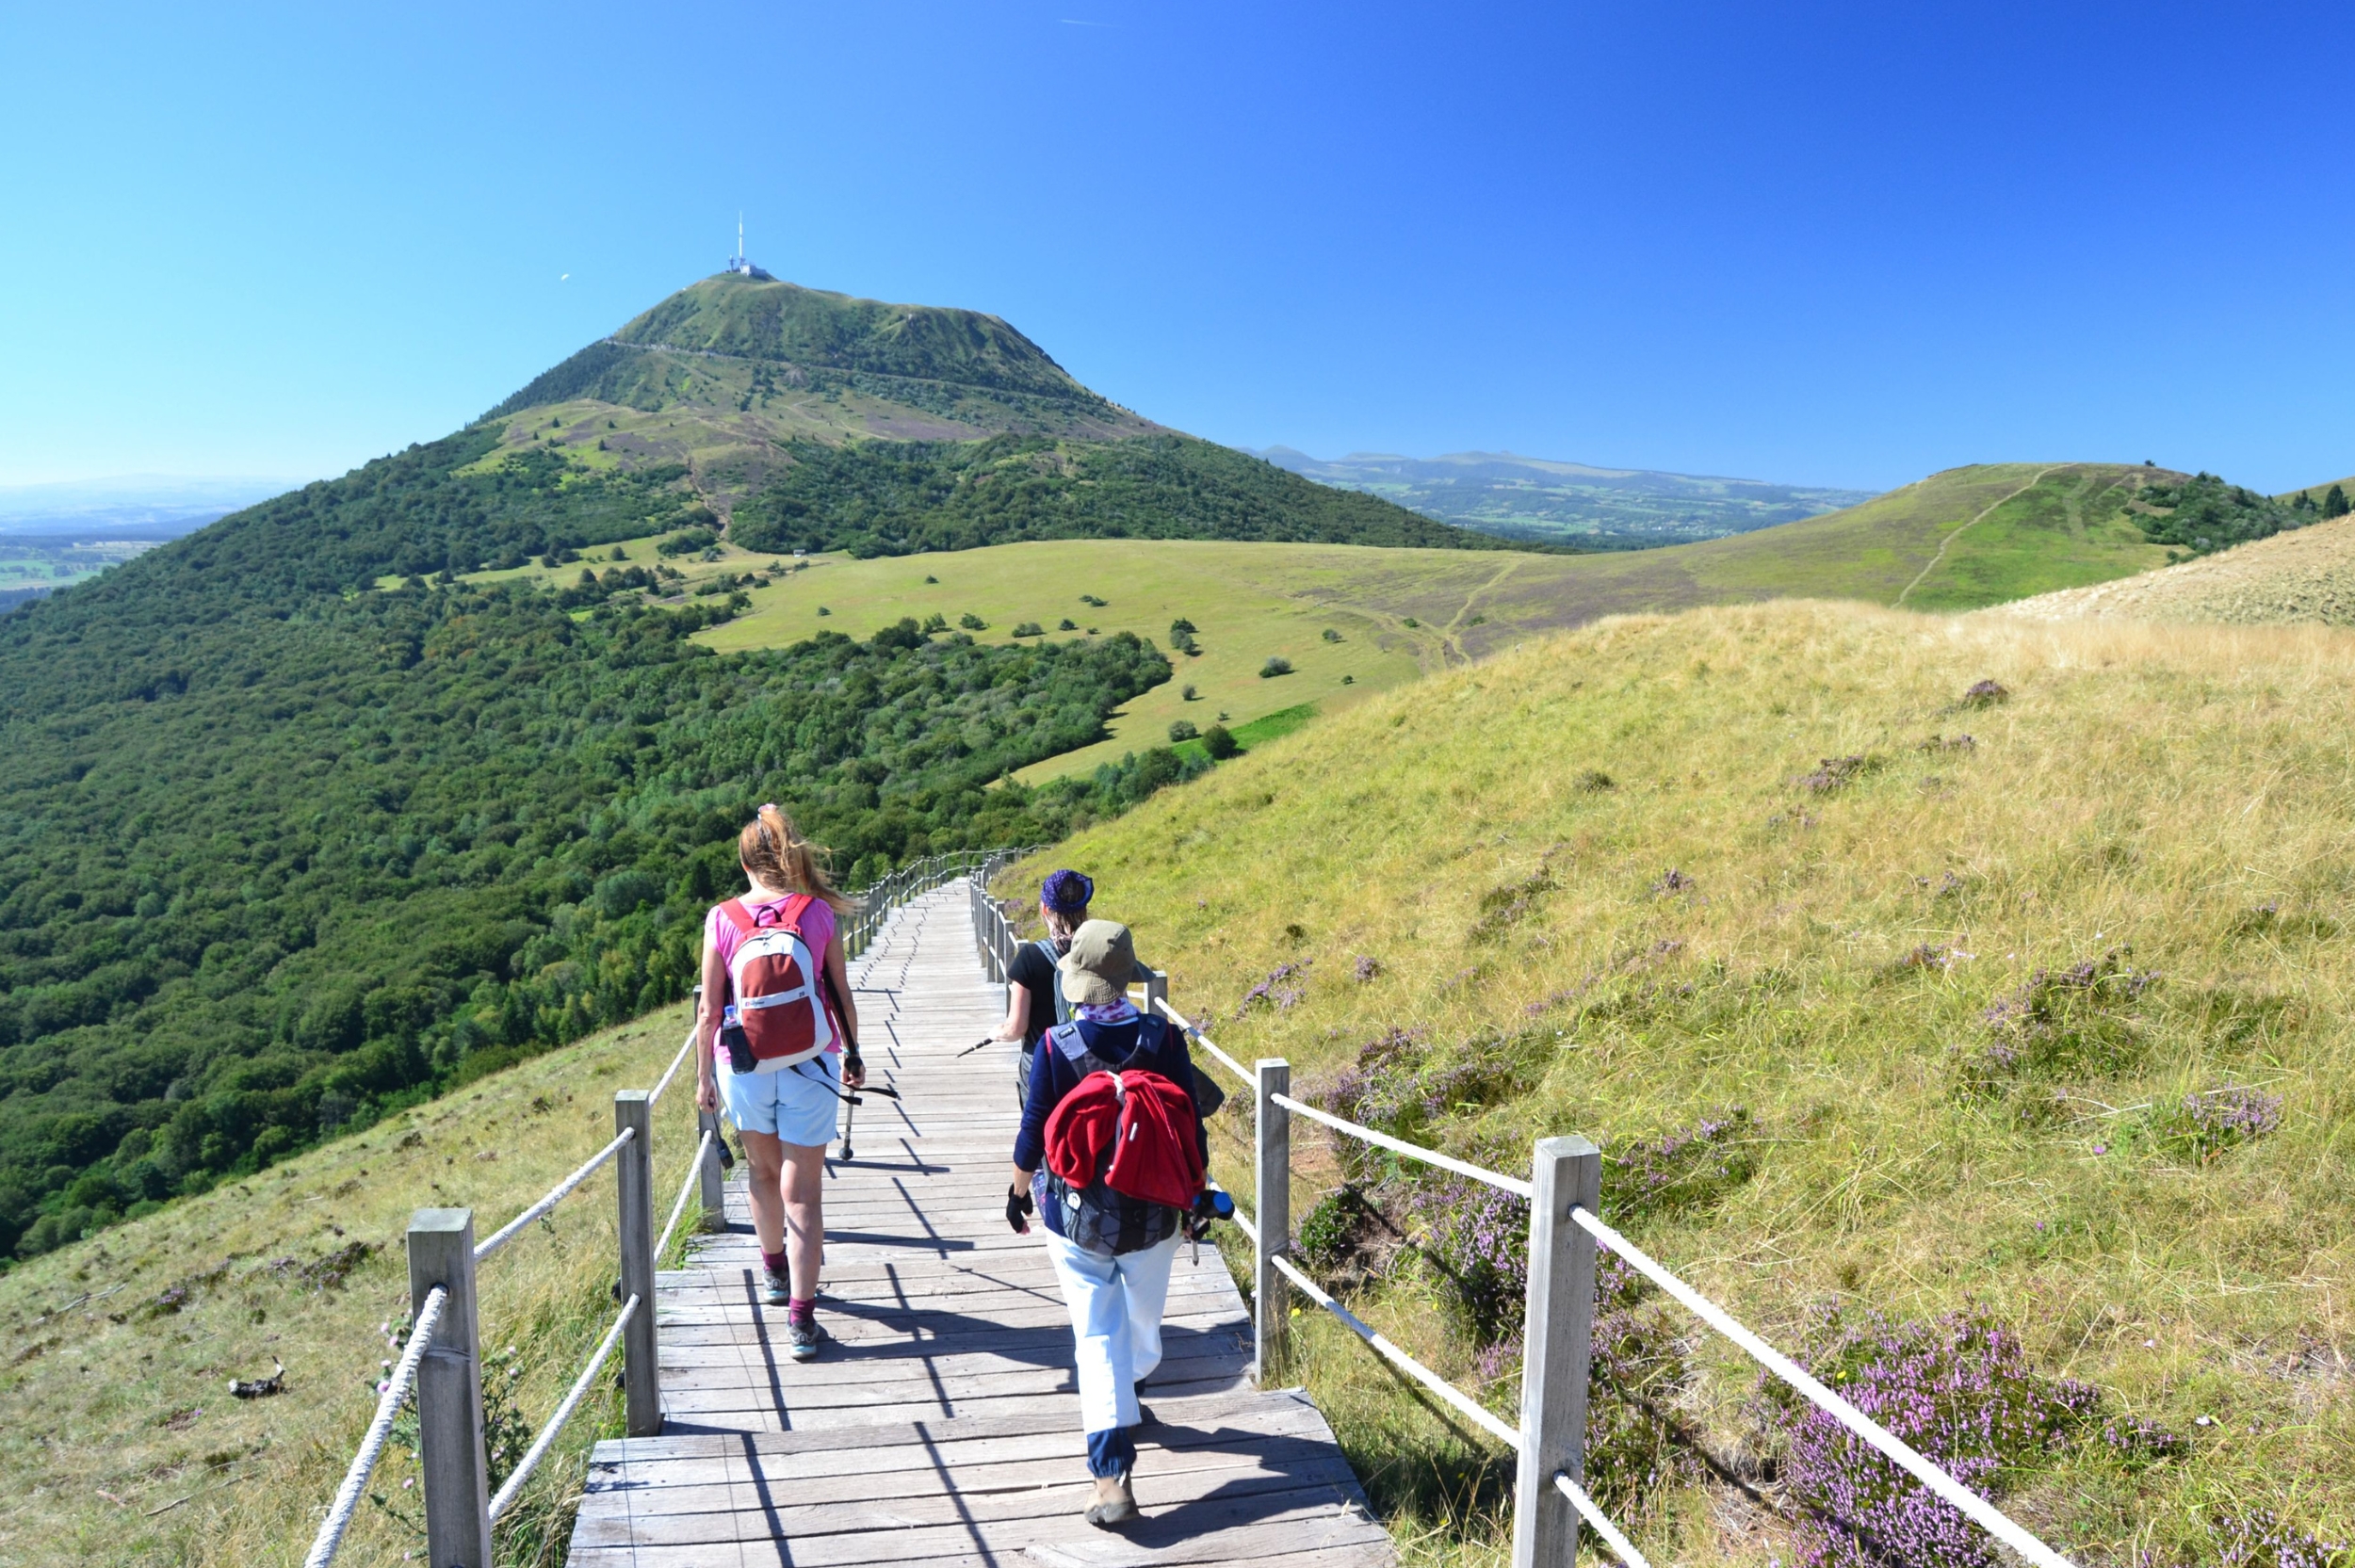 Green valleys and ancient volcanoes of the Auvergne